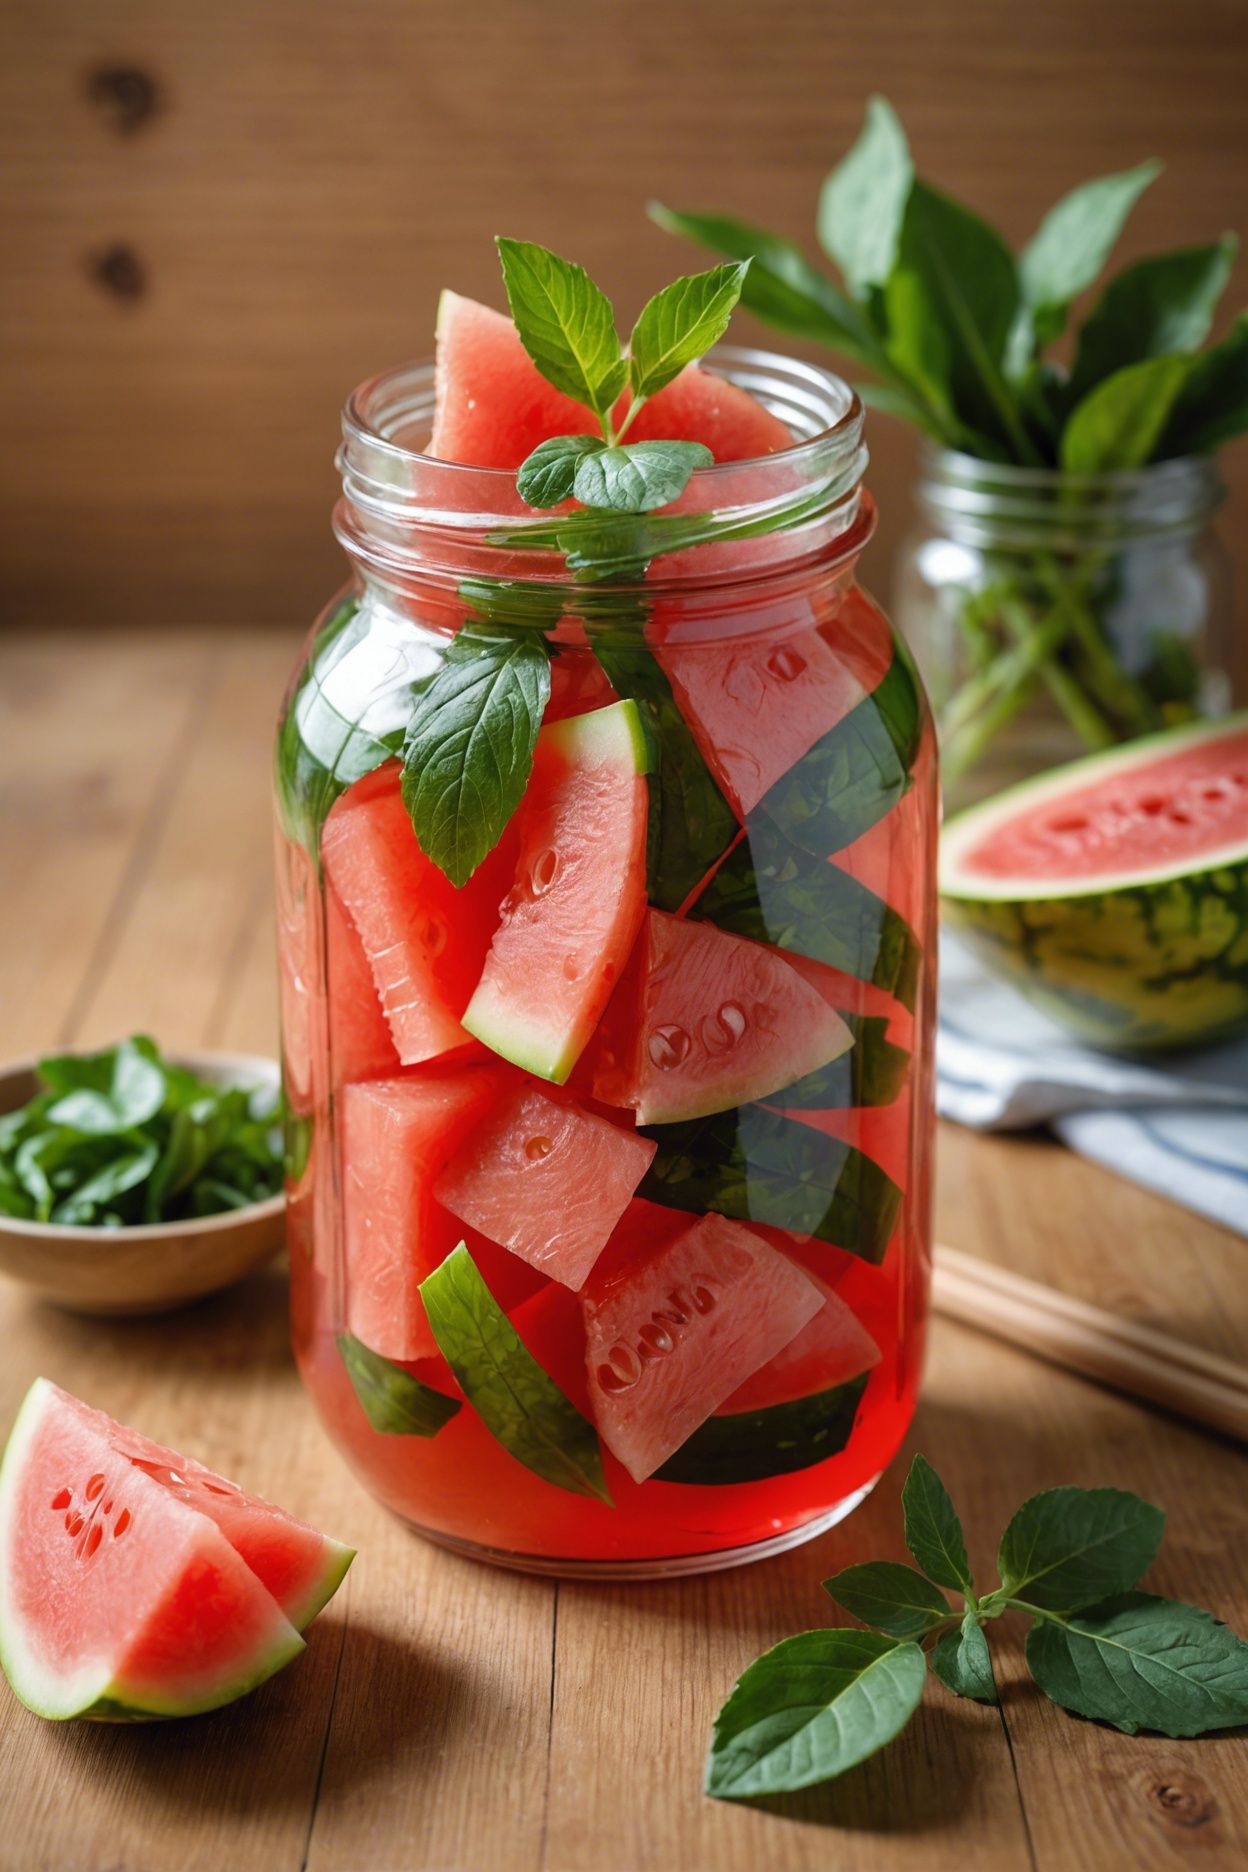 Japanese Pickled Watermelon Rind